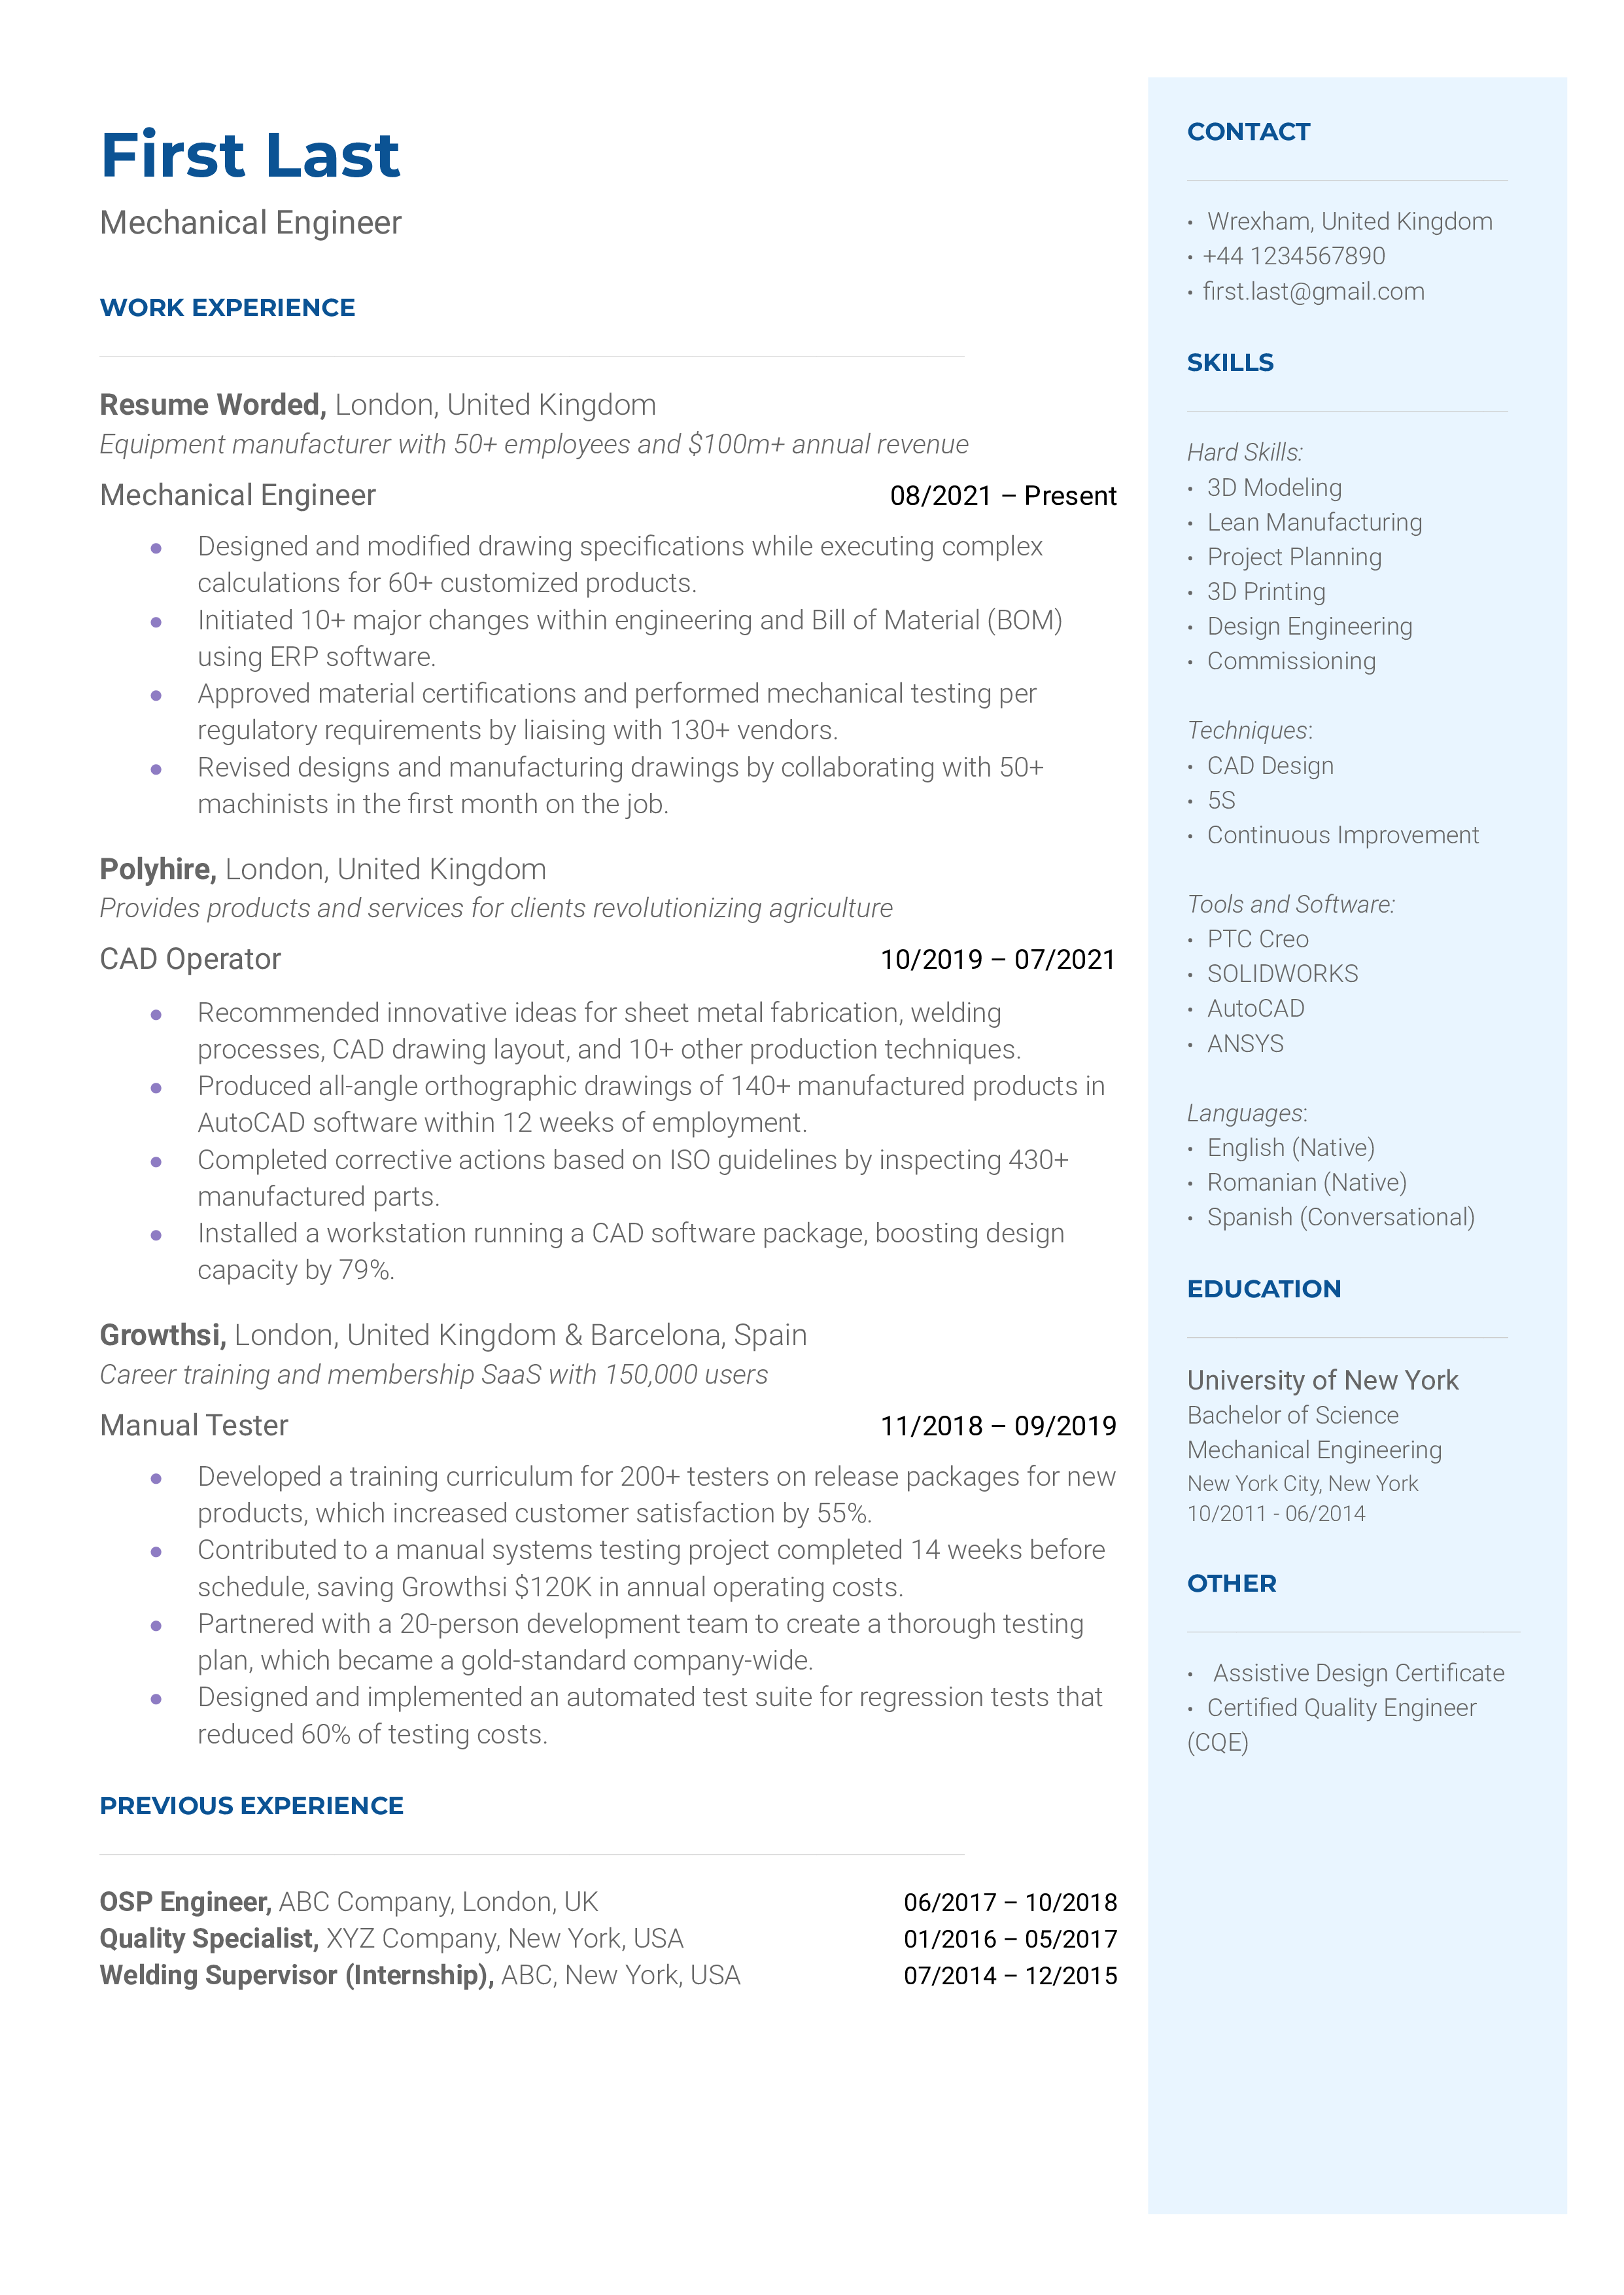 A resume for a mechanical engineer with a degree in mechanical engineering and experience as a mechanical engineer intern.